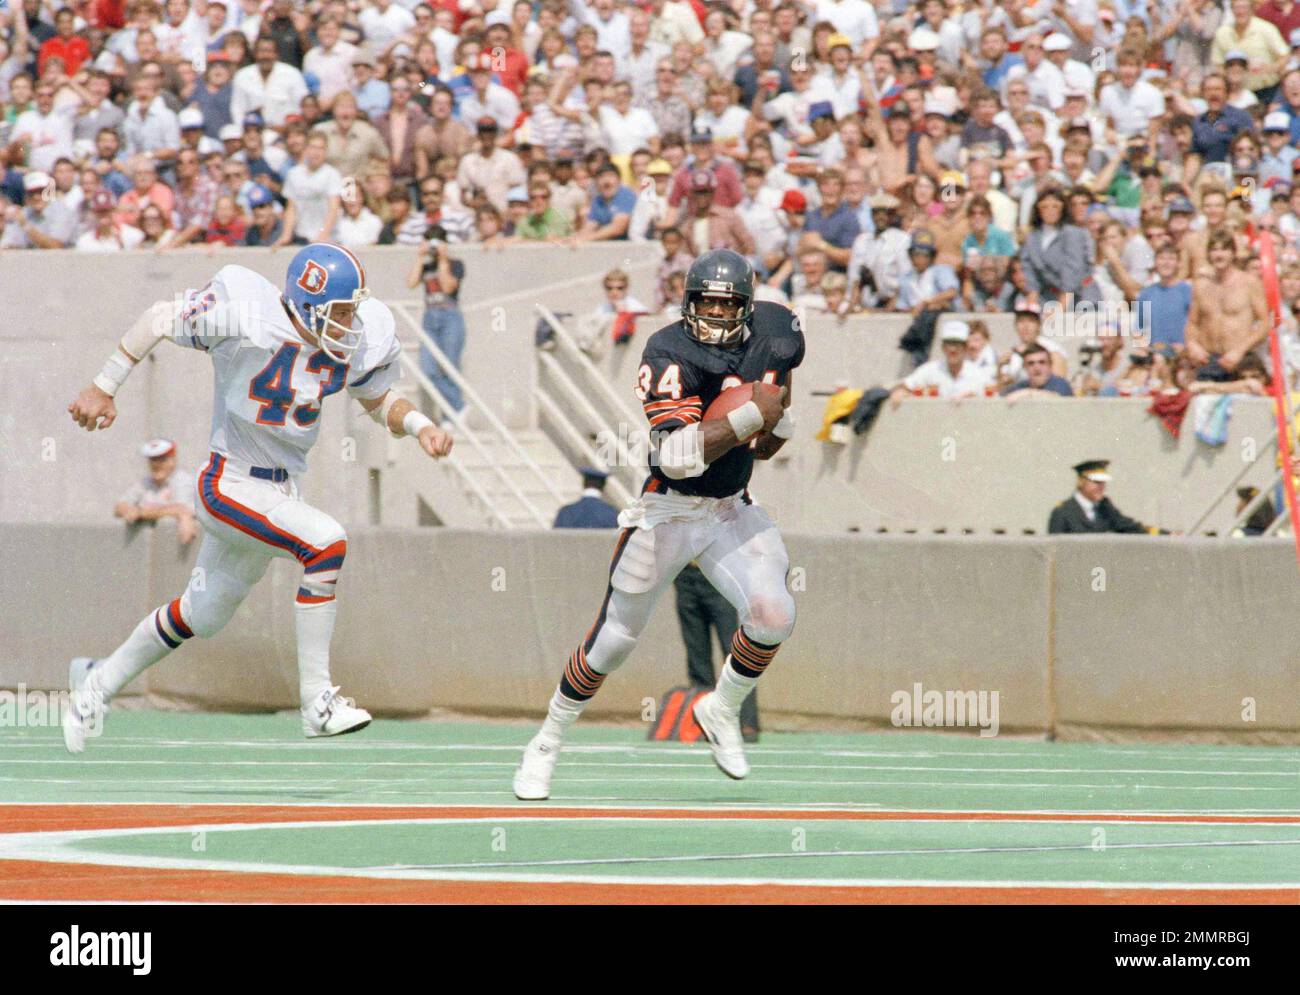 Chicago Bears' running back Walter Payton rushes away from Denver Broncos'  Steve Foley on a 40-yard gain in the third quarter of their game in  Chicago, Sept. 9, 1984. Bears won, 27-0. (